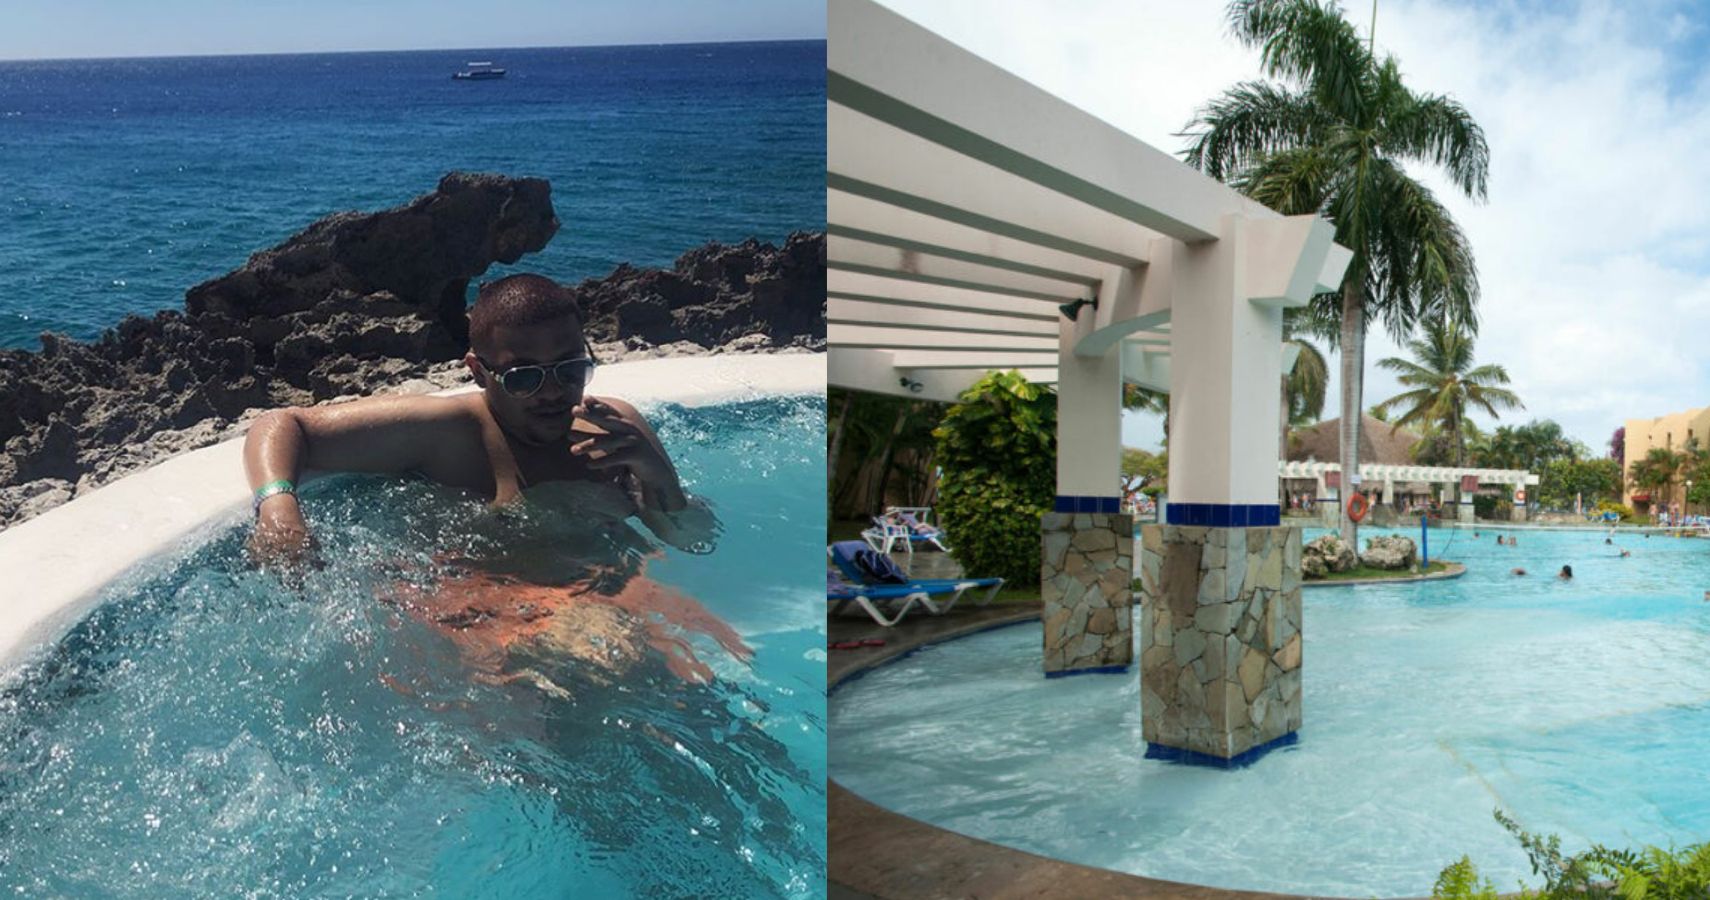 Man in jacuzzi on reef and pool at Casa Marina Dominican Republic